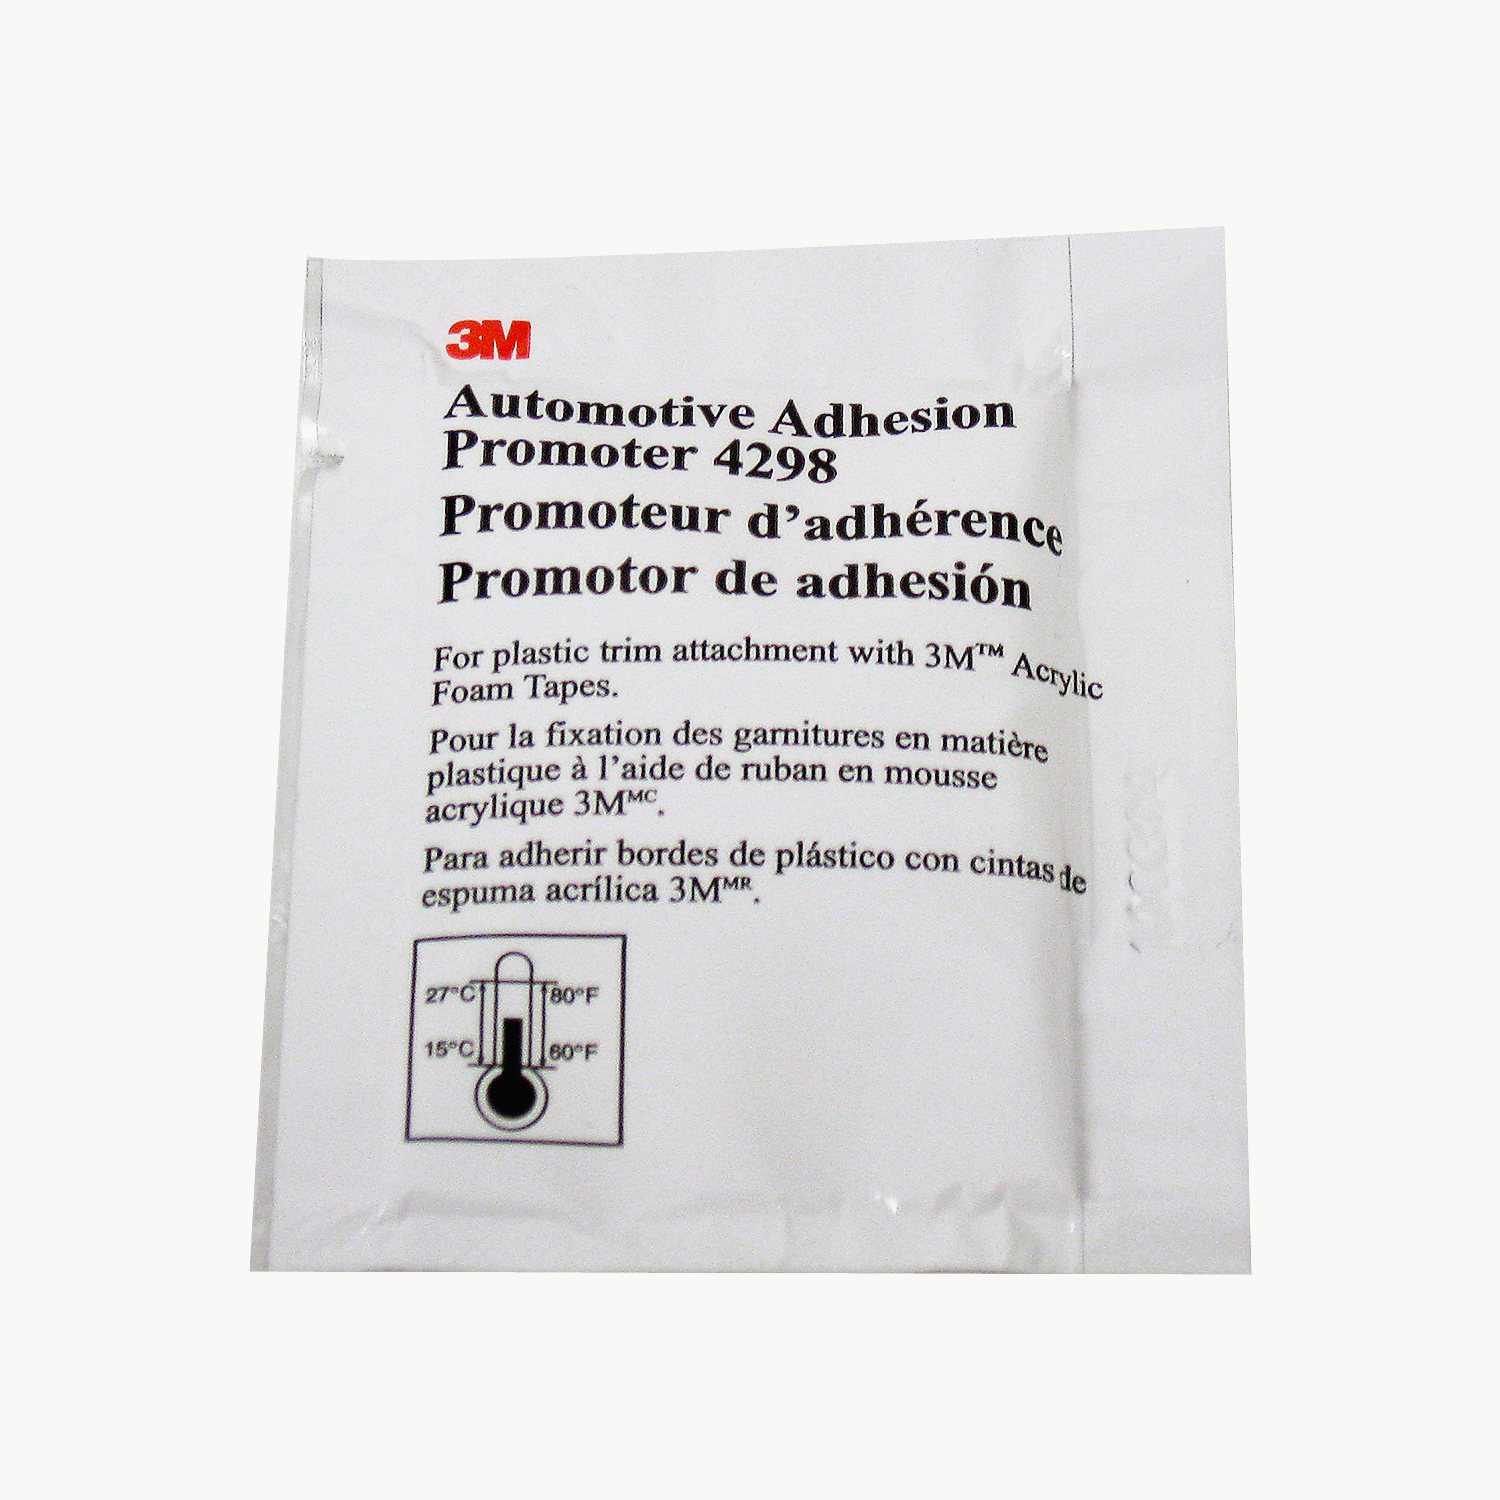 3M 4298 Adhesion Promoter for Acrylic and Rubber Based Tapes 5 Pack Sponge 